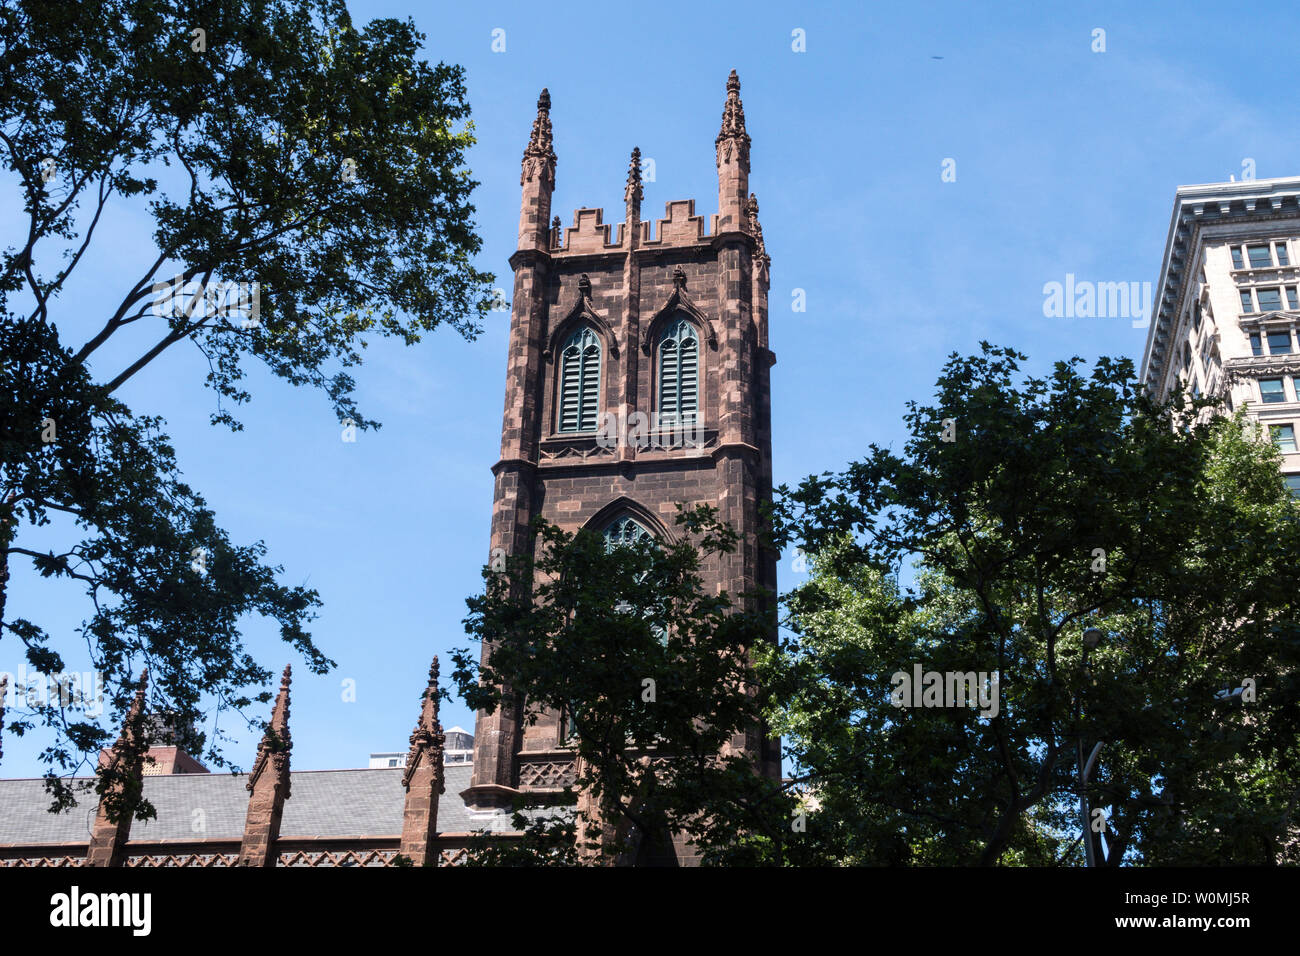 The First Presbyterian Church in the City of New York, USA Stock Photo